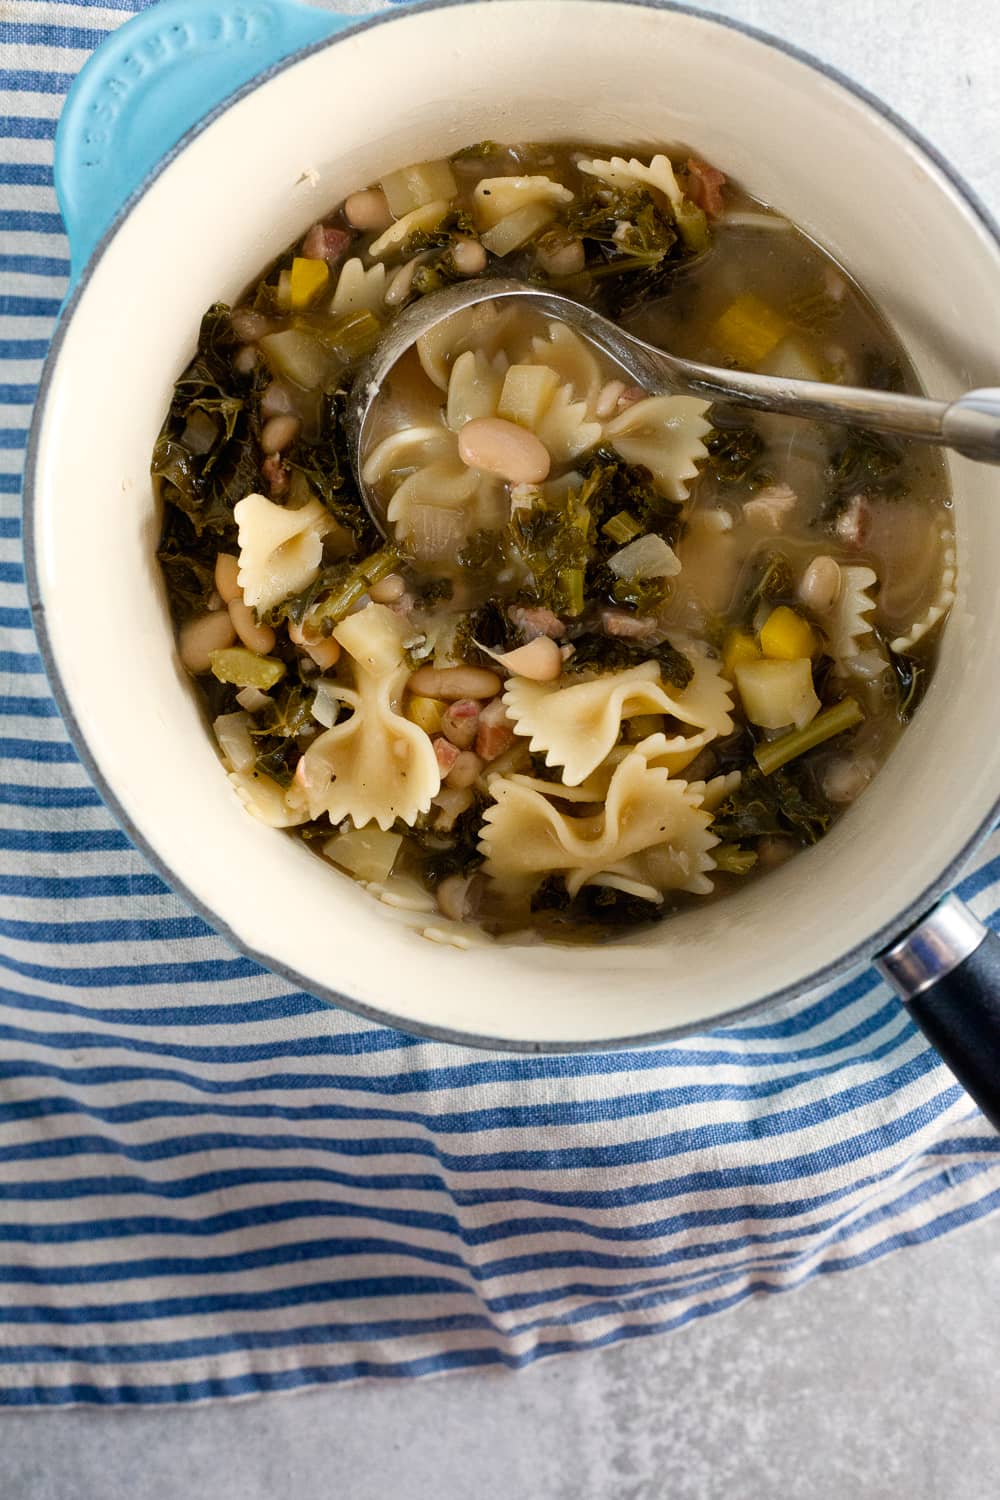 White bean and kale soup is the answer to your springtime cold. You’ll want to slurp it straight from the bowl!